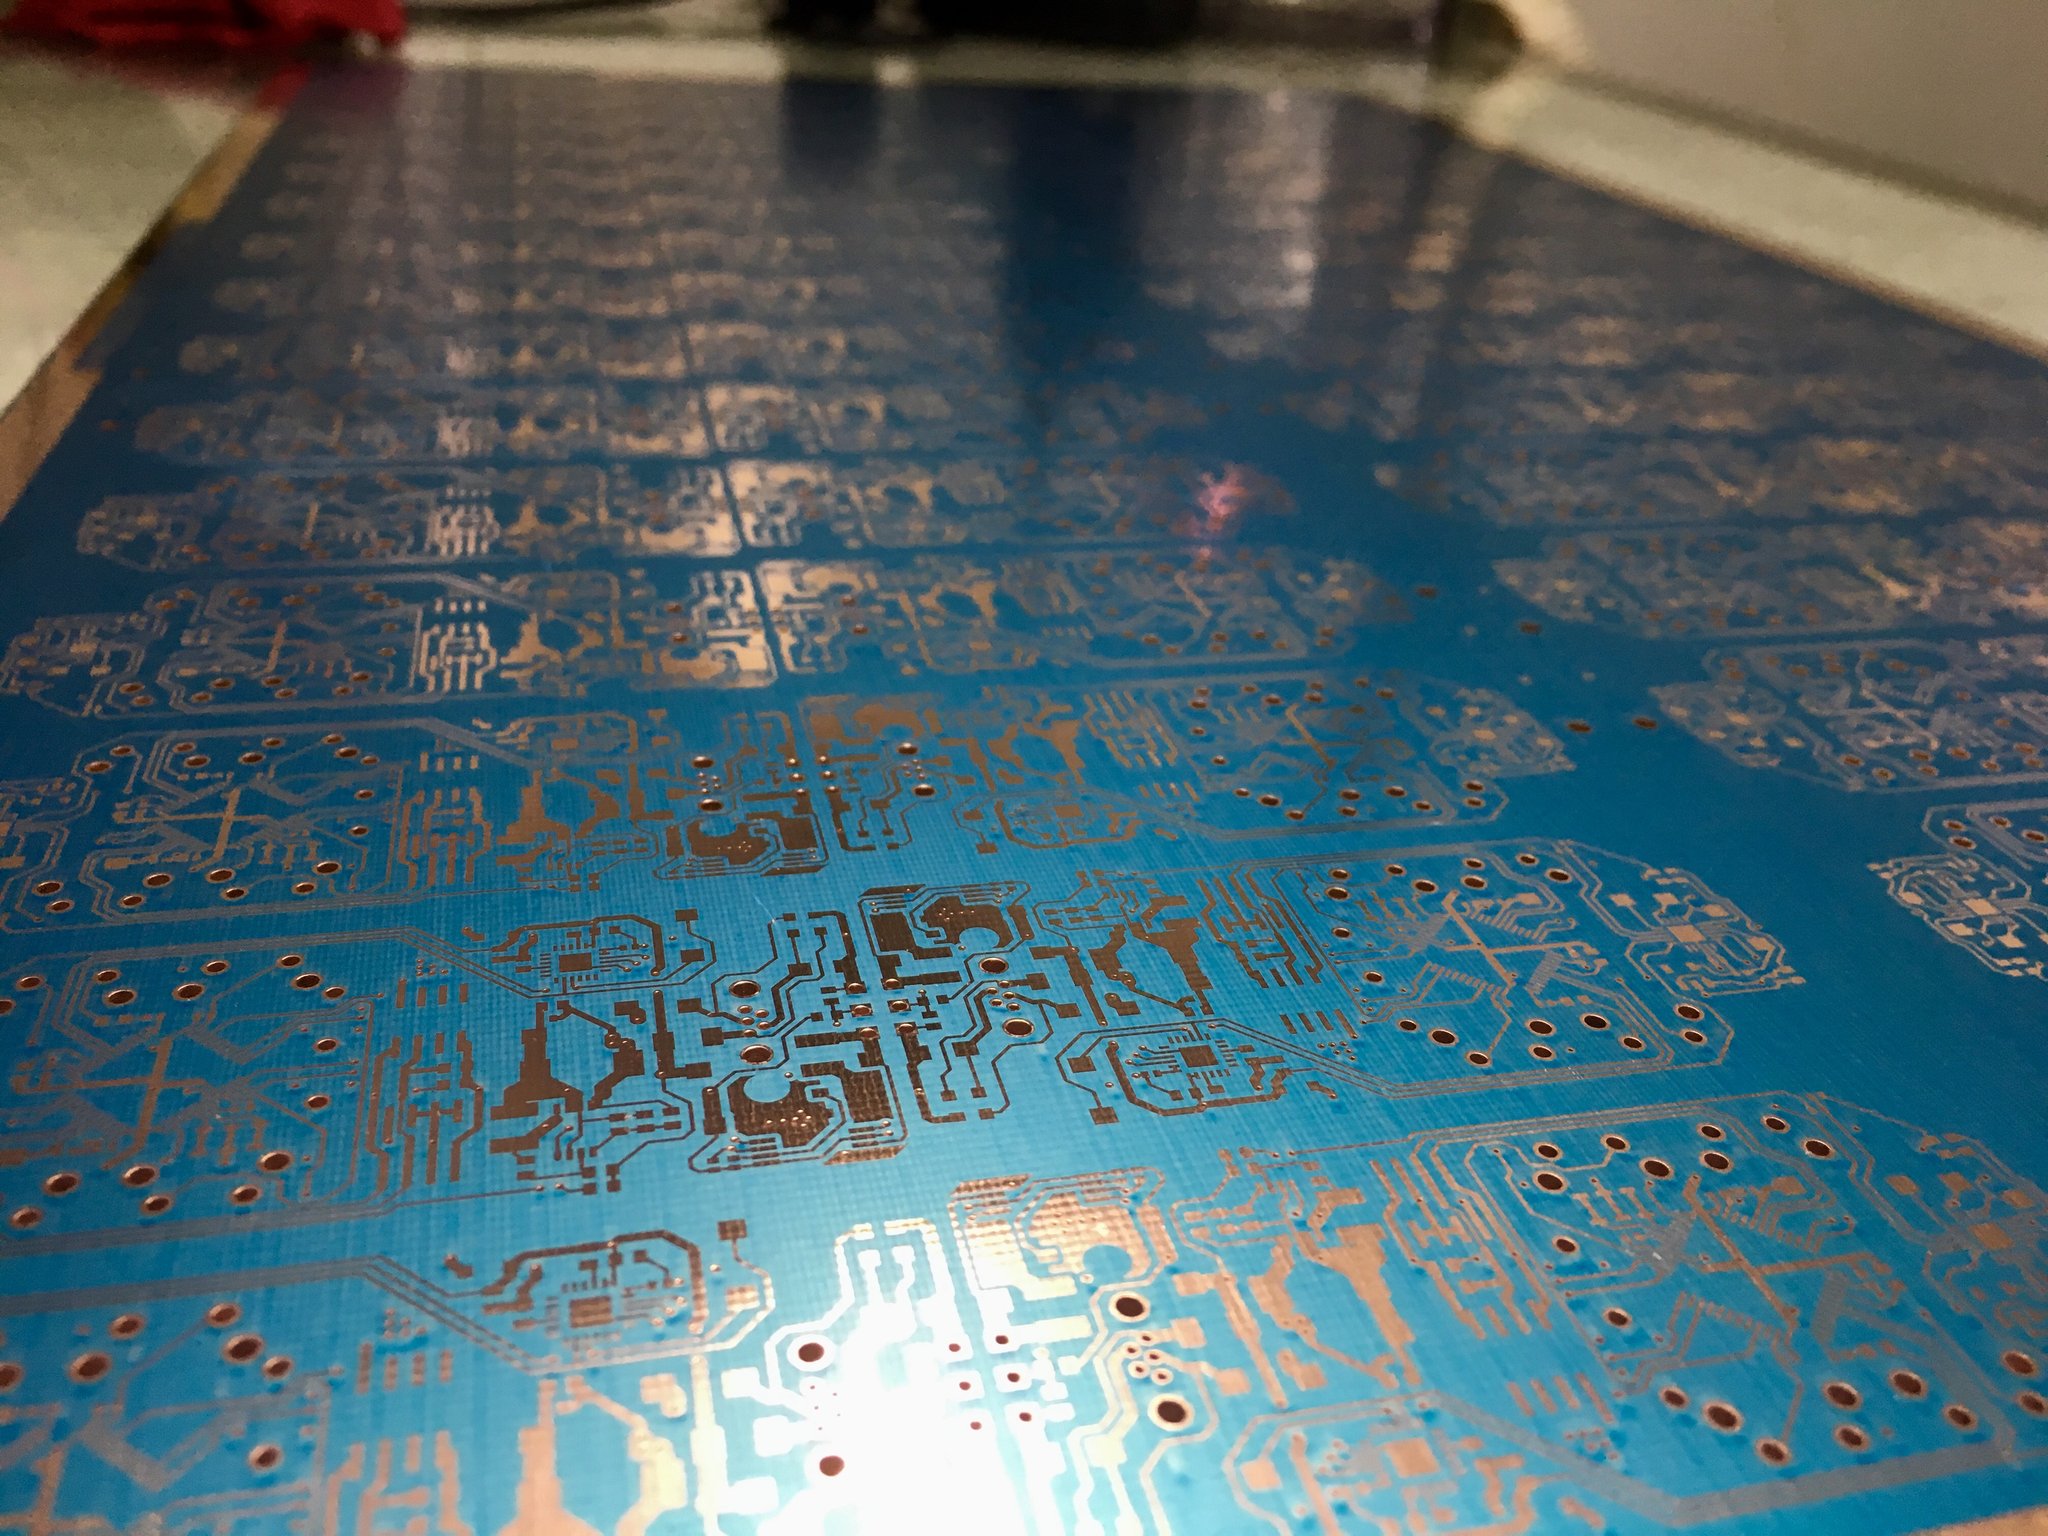 WellPCB Published a new Article: “Tips for choosing PCB manufacturers and suppliers in China”